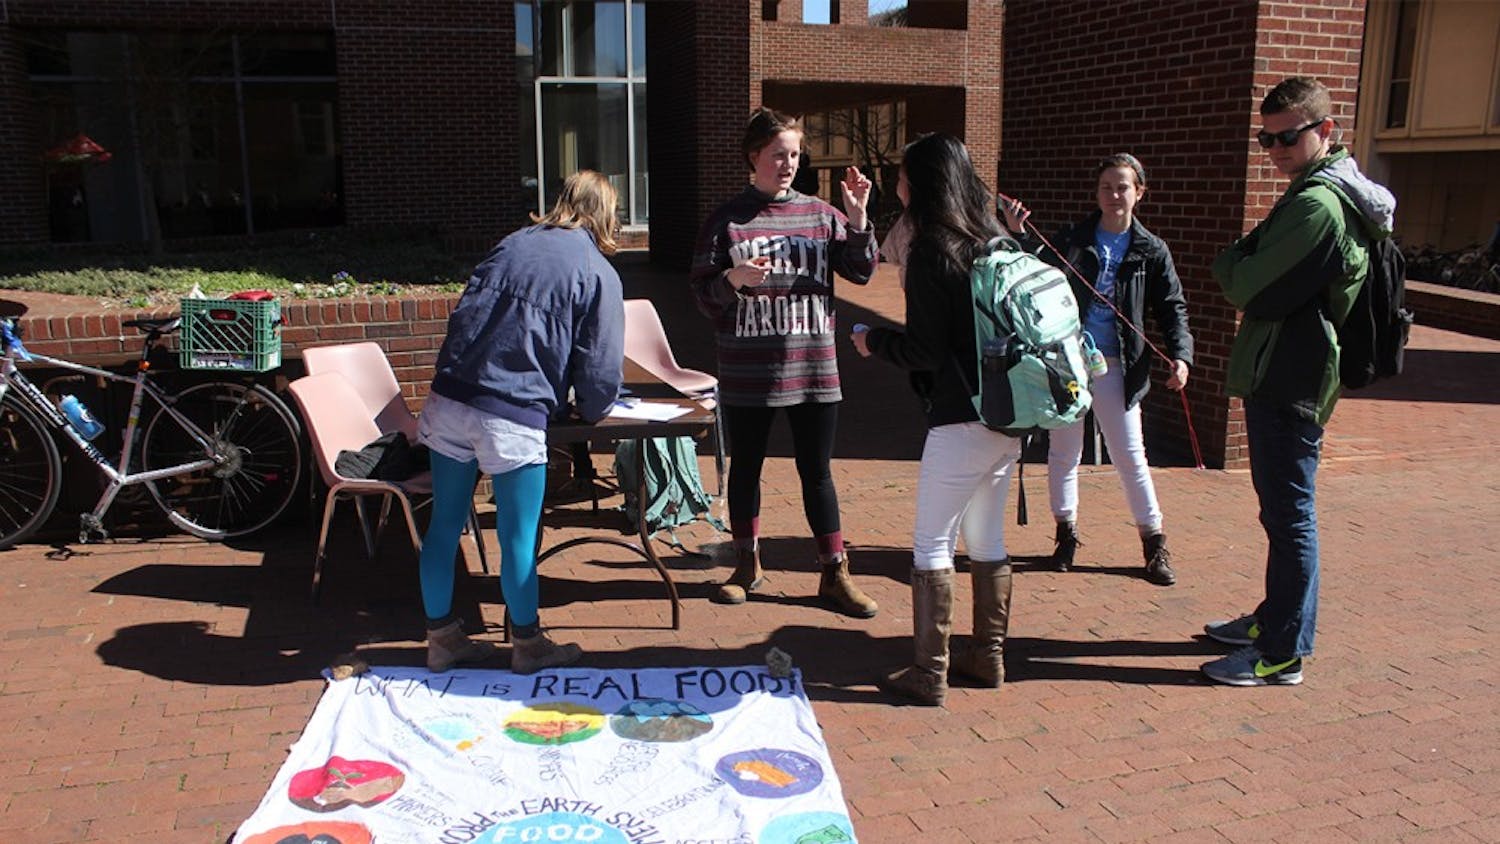 Members of UNC Real Food Challenge talked to students about what Real Food is and the group's goals for the semester in Davis Courtyard on Wednesday.